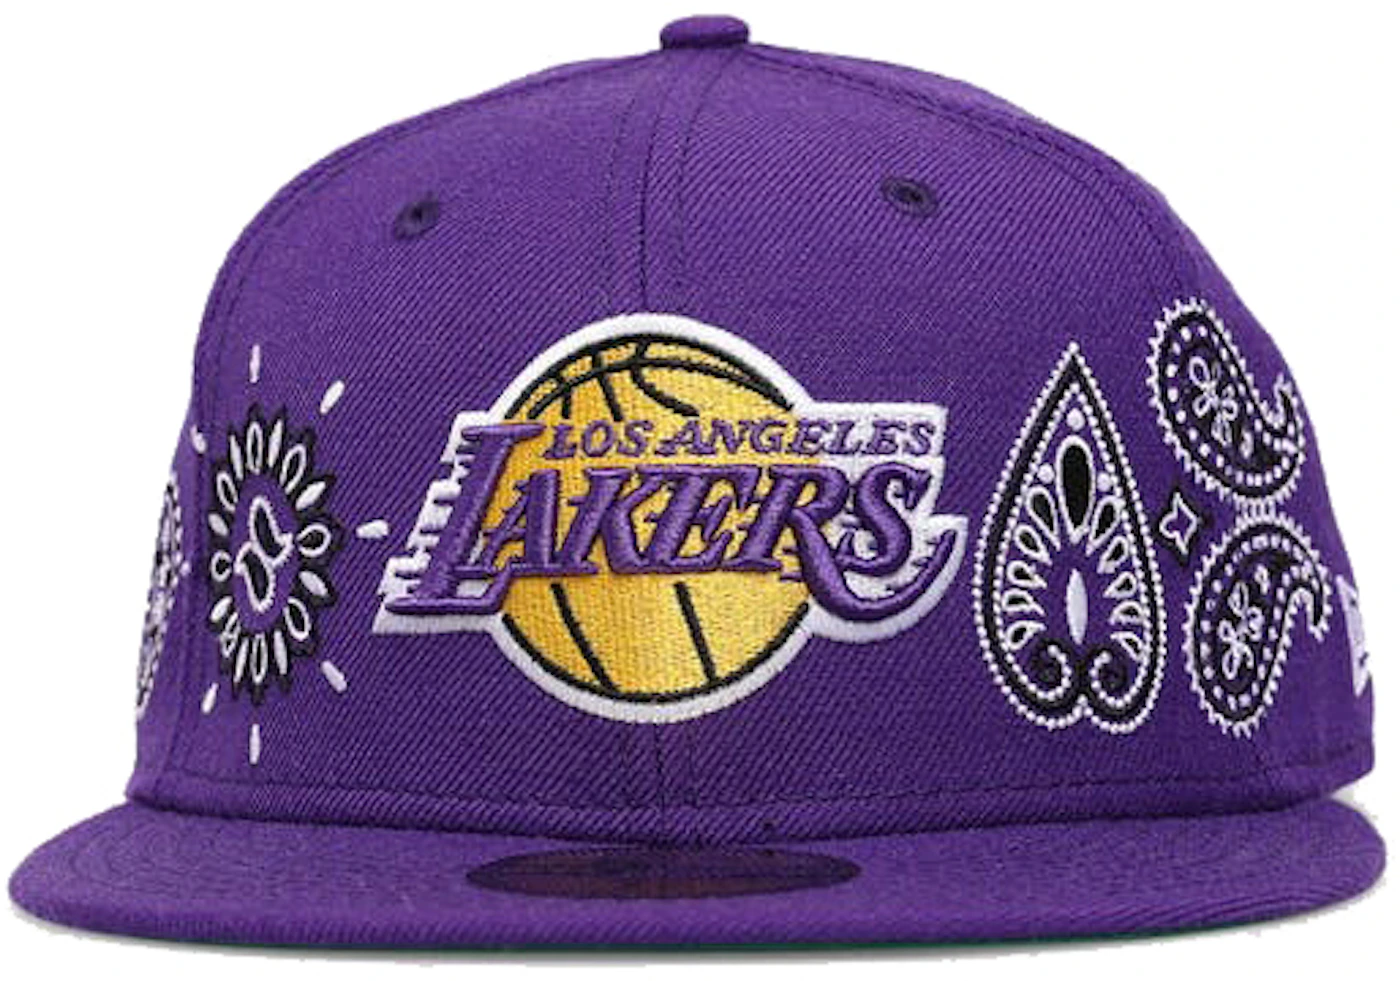 Los Angeles Lakers DOUBLE WHAMMY Purple-White Fitted Hat